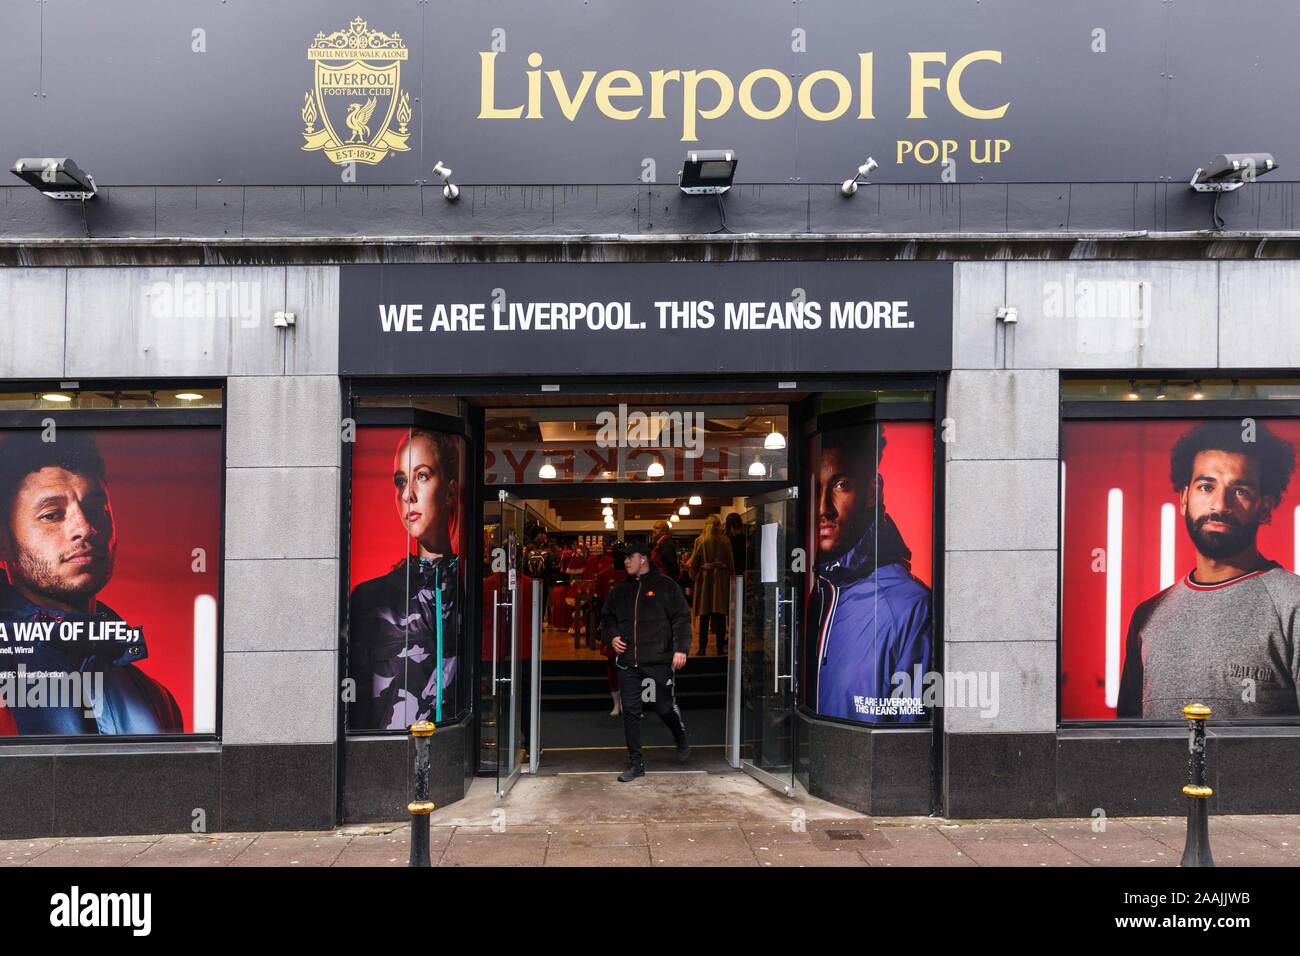 Cork, Ireland,  22nd November 2019.   John Aldridge Meet and Greet at Liverpool FC Store, Cork City. People lined up in their masses in the pop up Liverpool FC Store on Maylor Street at pm today to attend a meet and greet with former football player and manager, John Aldridge. Credit: Damian Coleman Credit: Damian Coleman/Alamy Live News Stock Photo